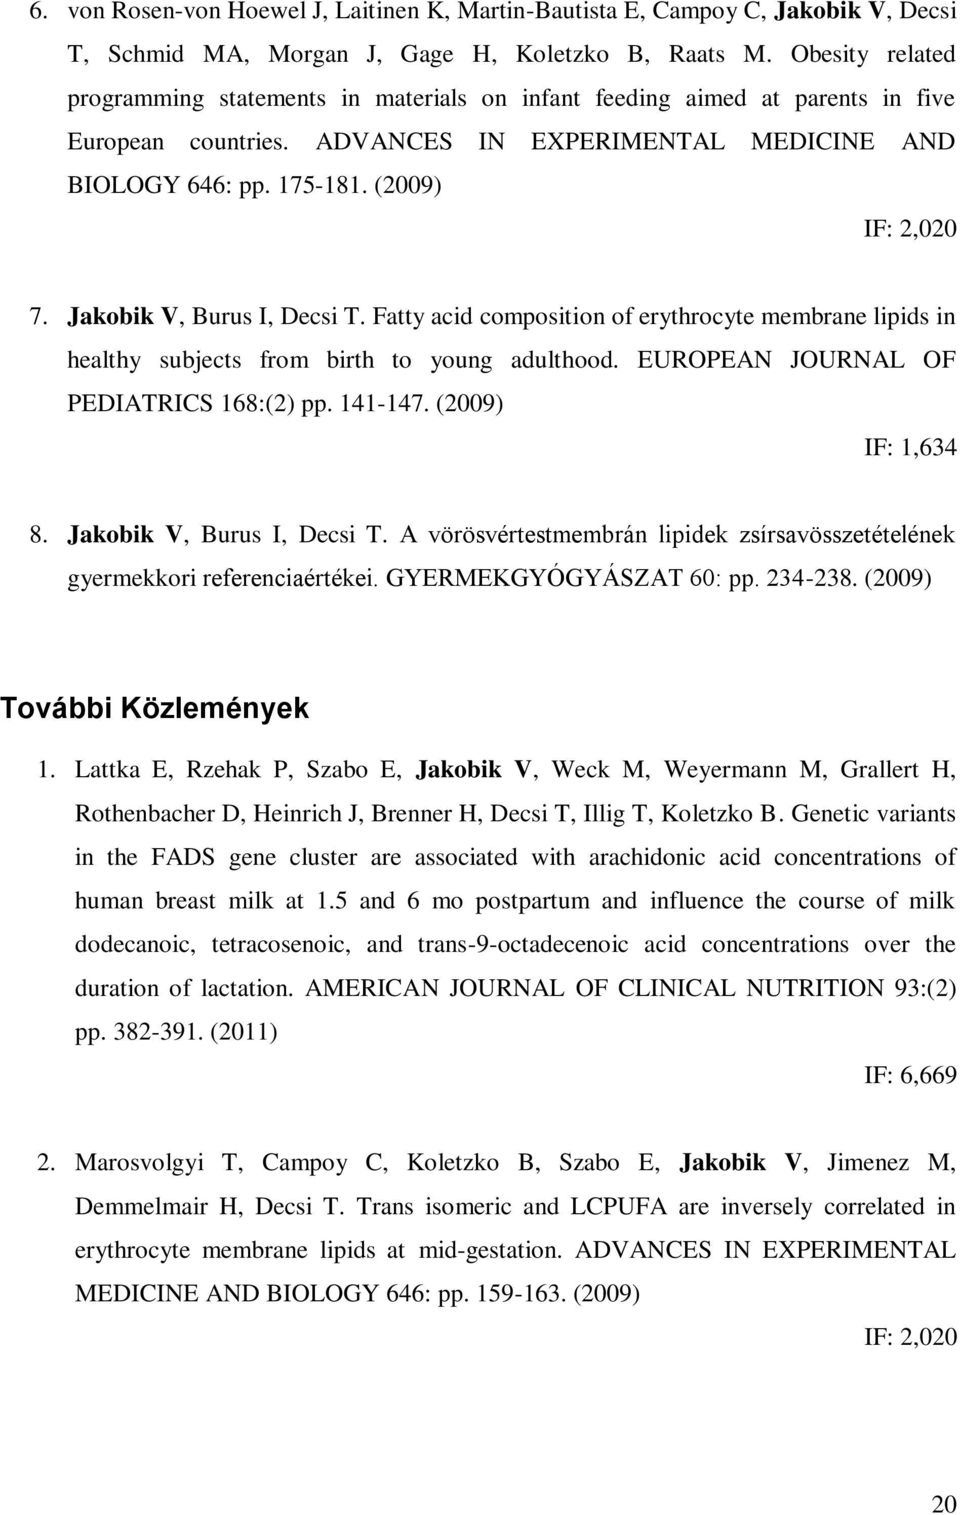 Jakobik V, Burus I, Decsi T. Fatty acid composition of erythrocyte membrane lipids in healthy subjects from birth to young adulthood. EUROPEAN JOURNAL OF PEDIATRICS 168:(2) pp. 141-147.